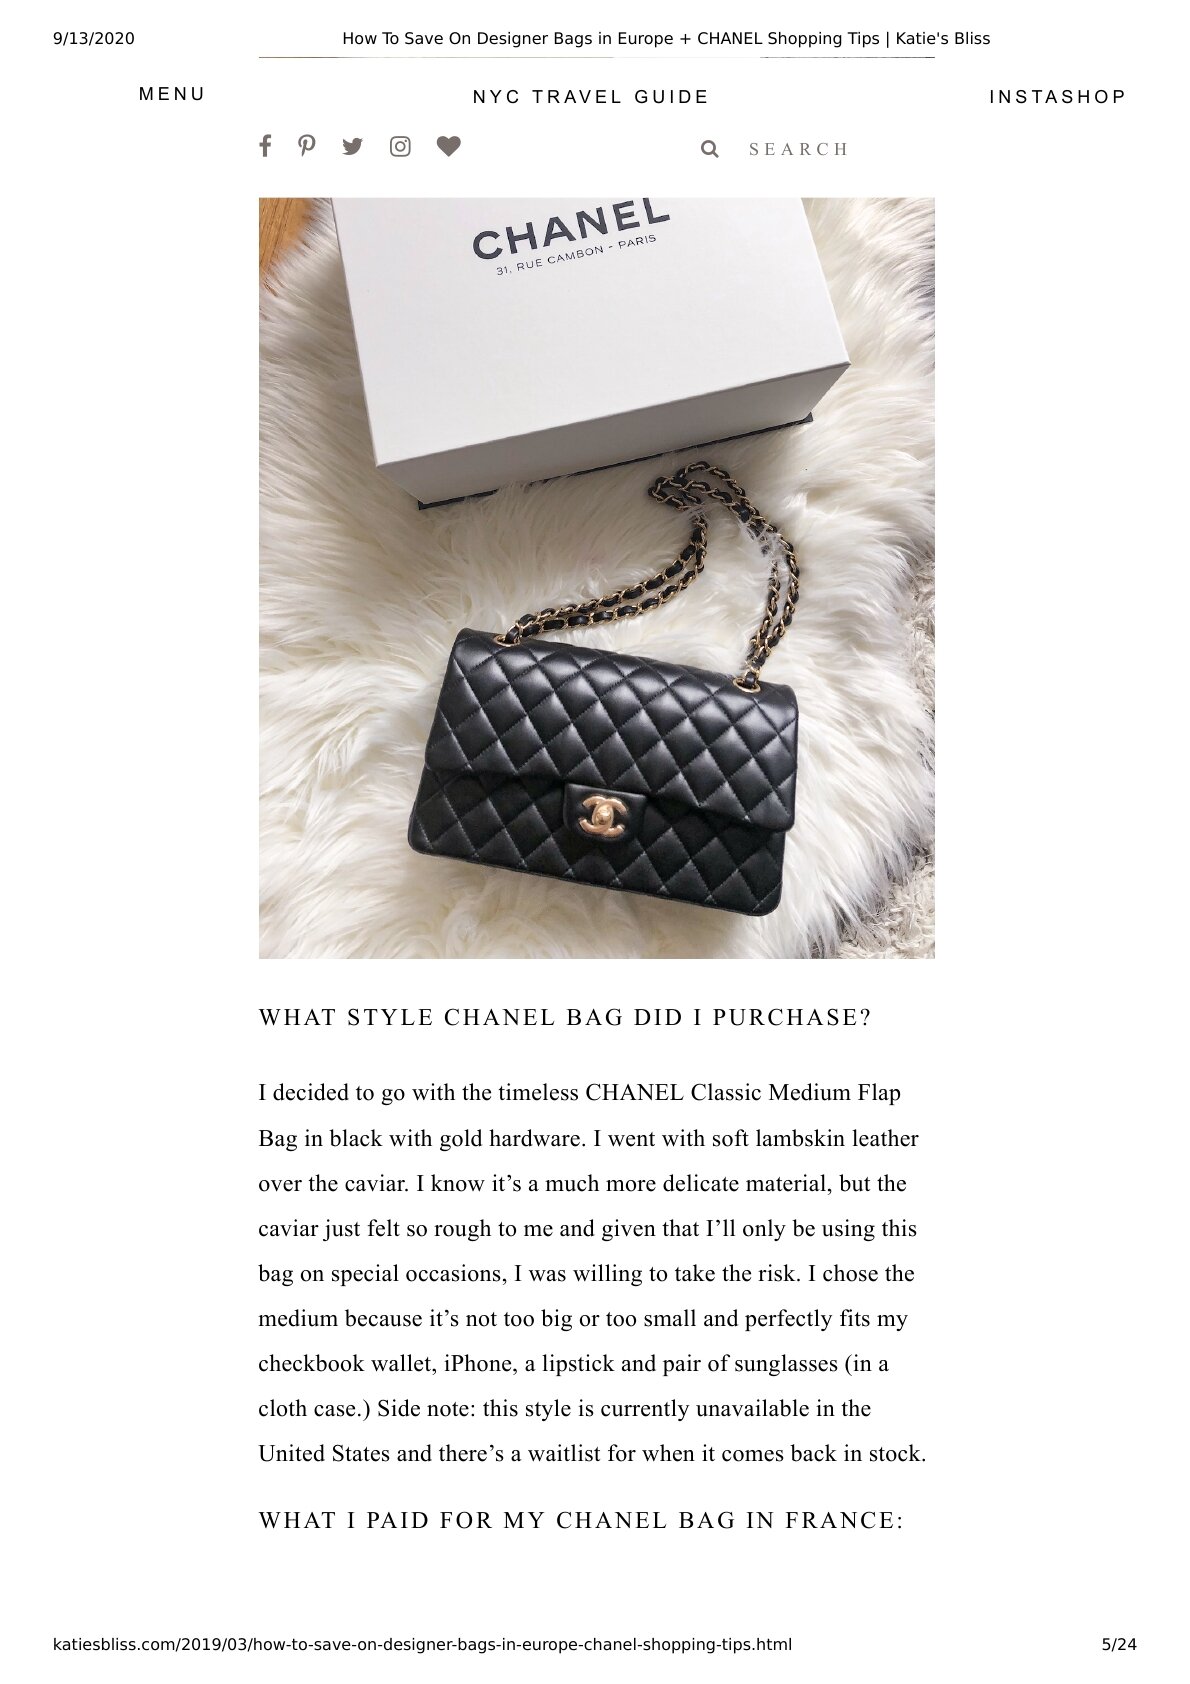 how to save on designer bags in europe + chanel shopping tips - My